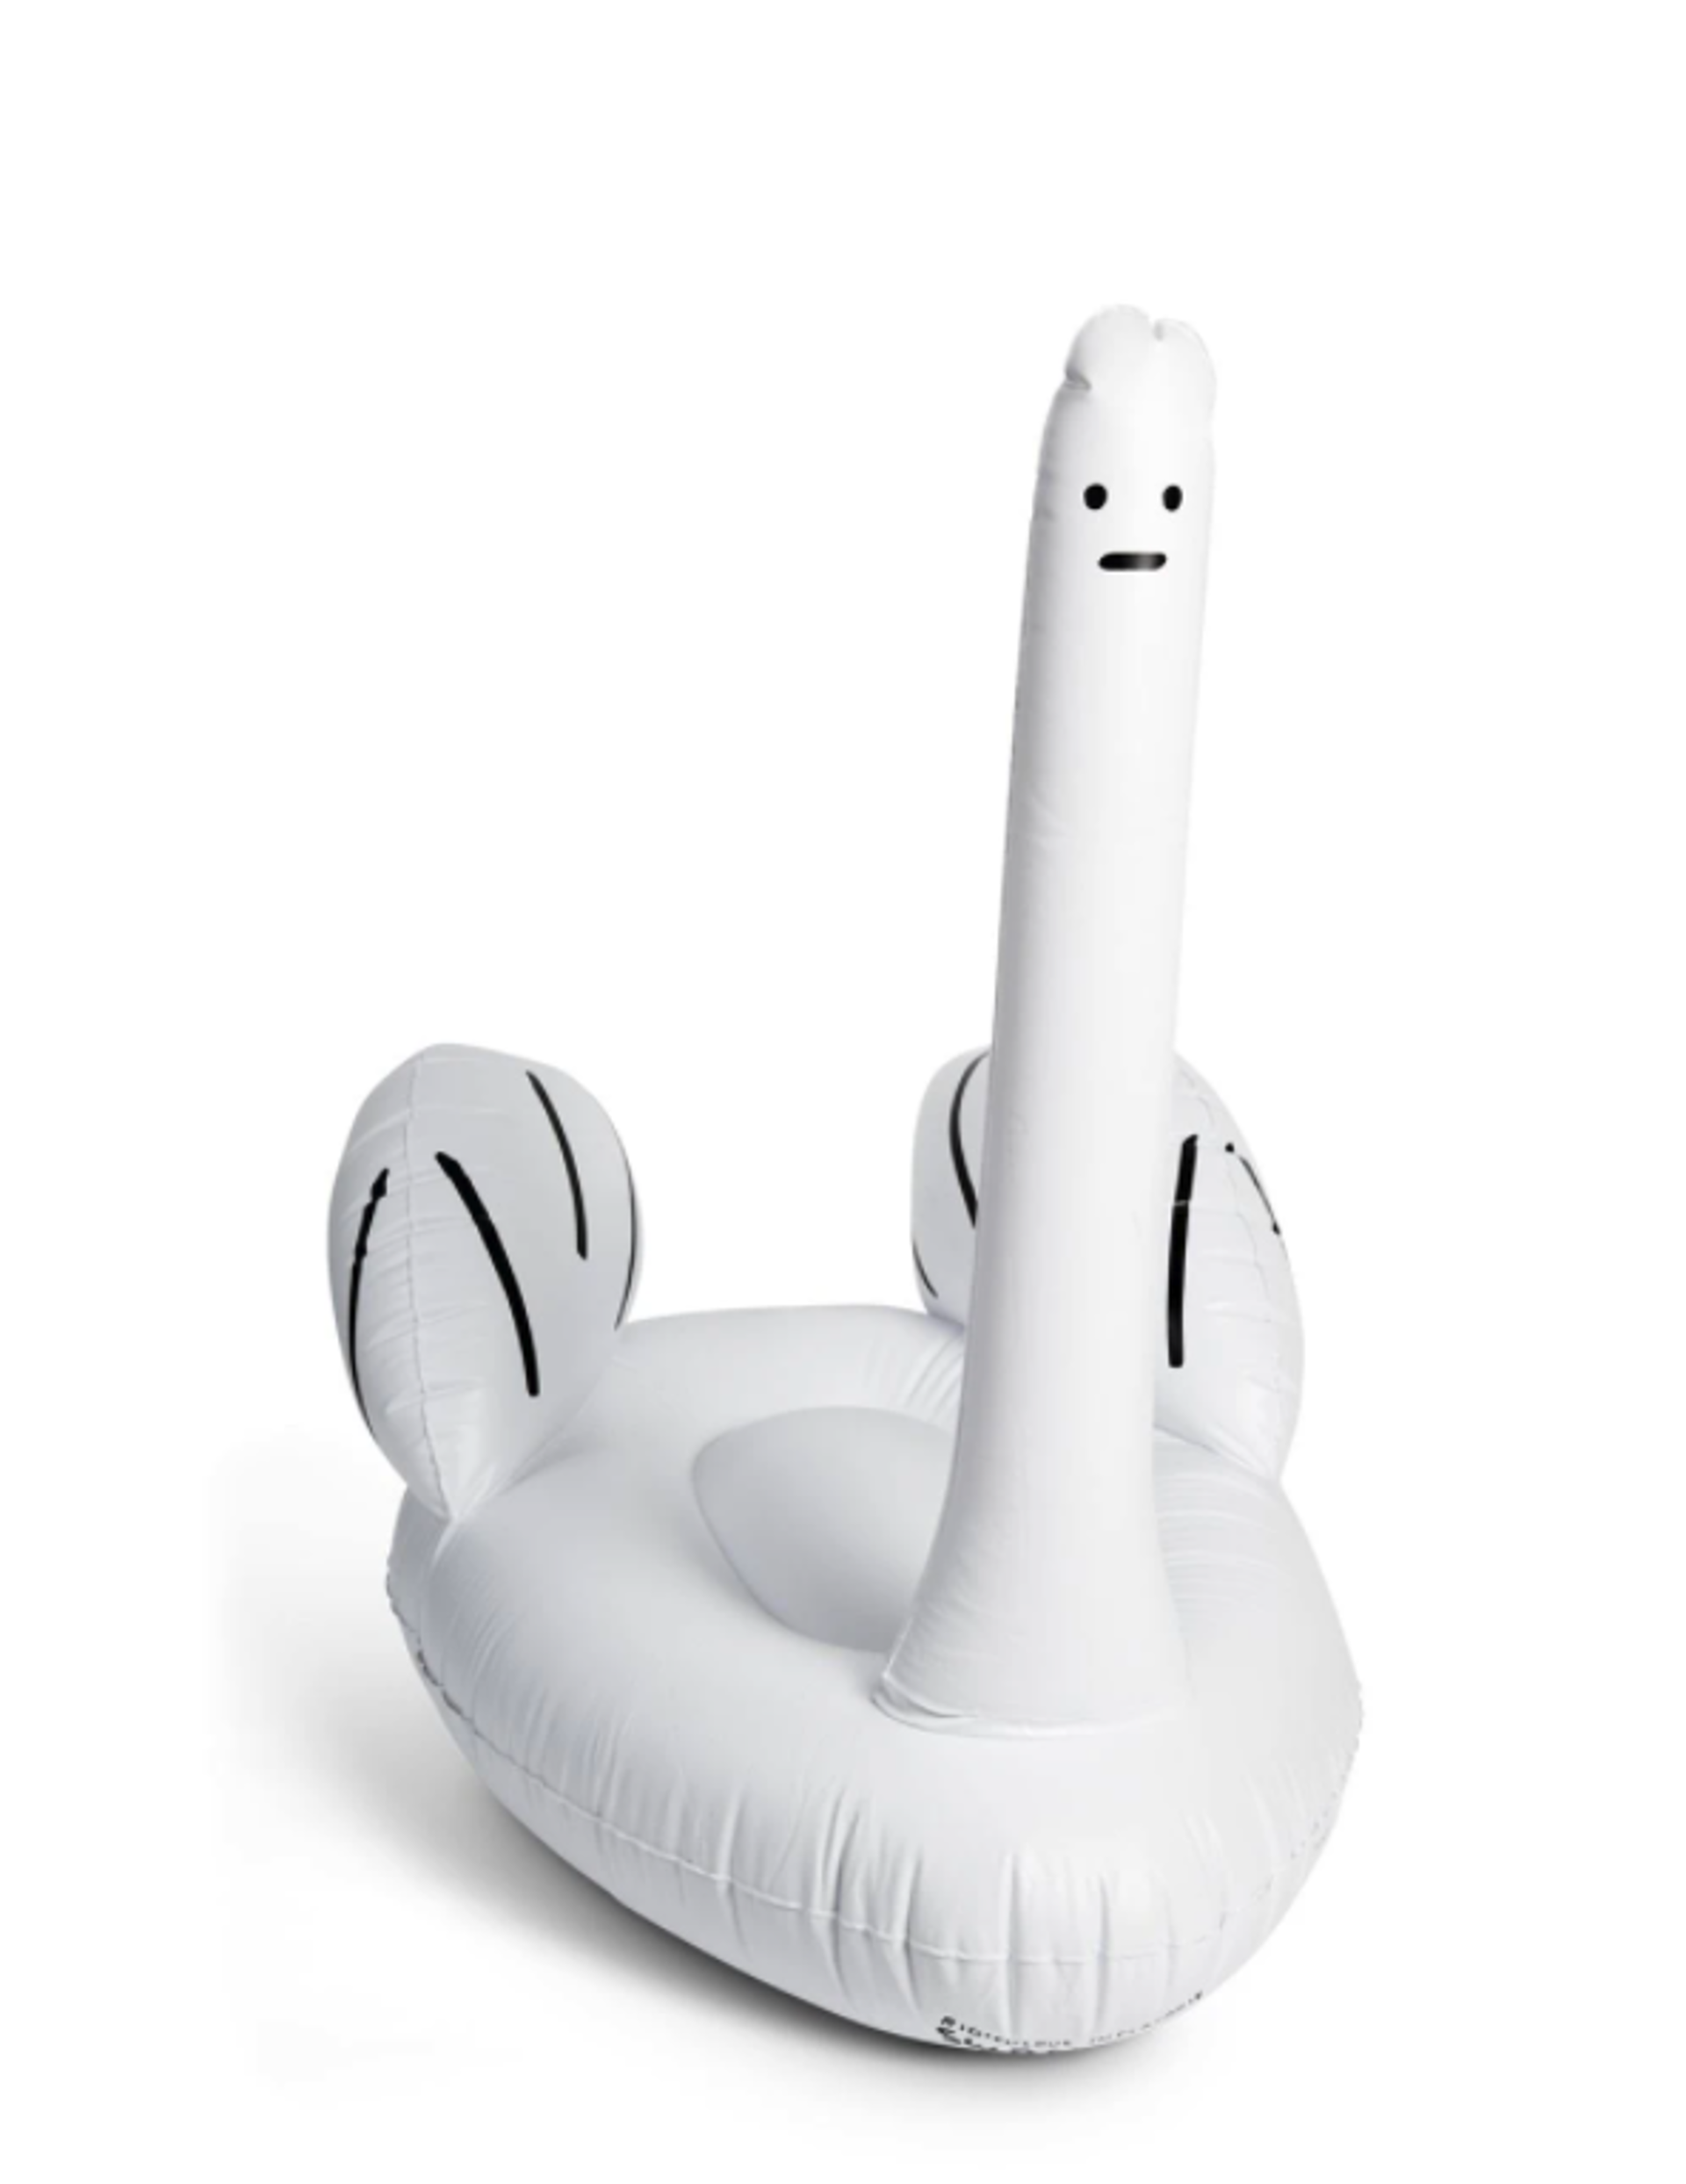 Ridiculous Inflatable Swan Thing by David Shrigley